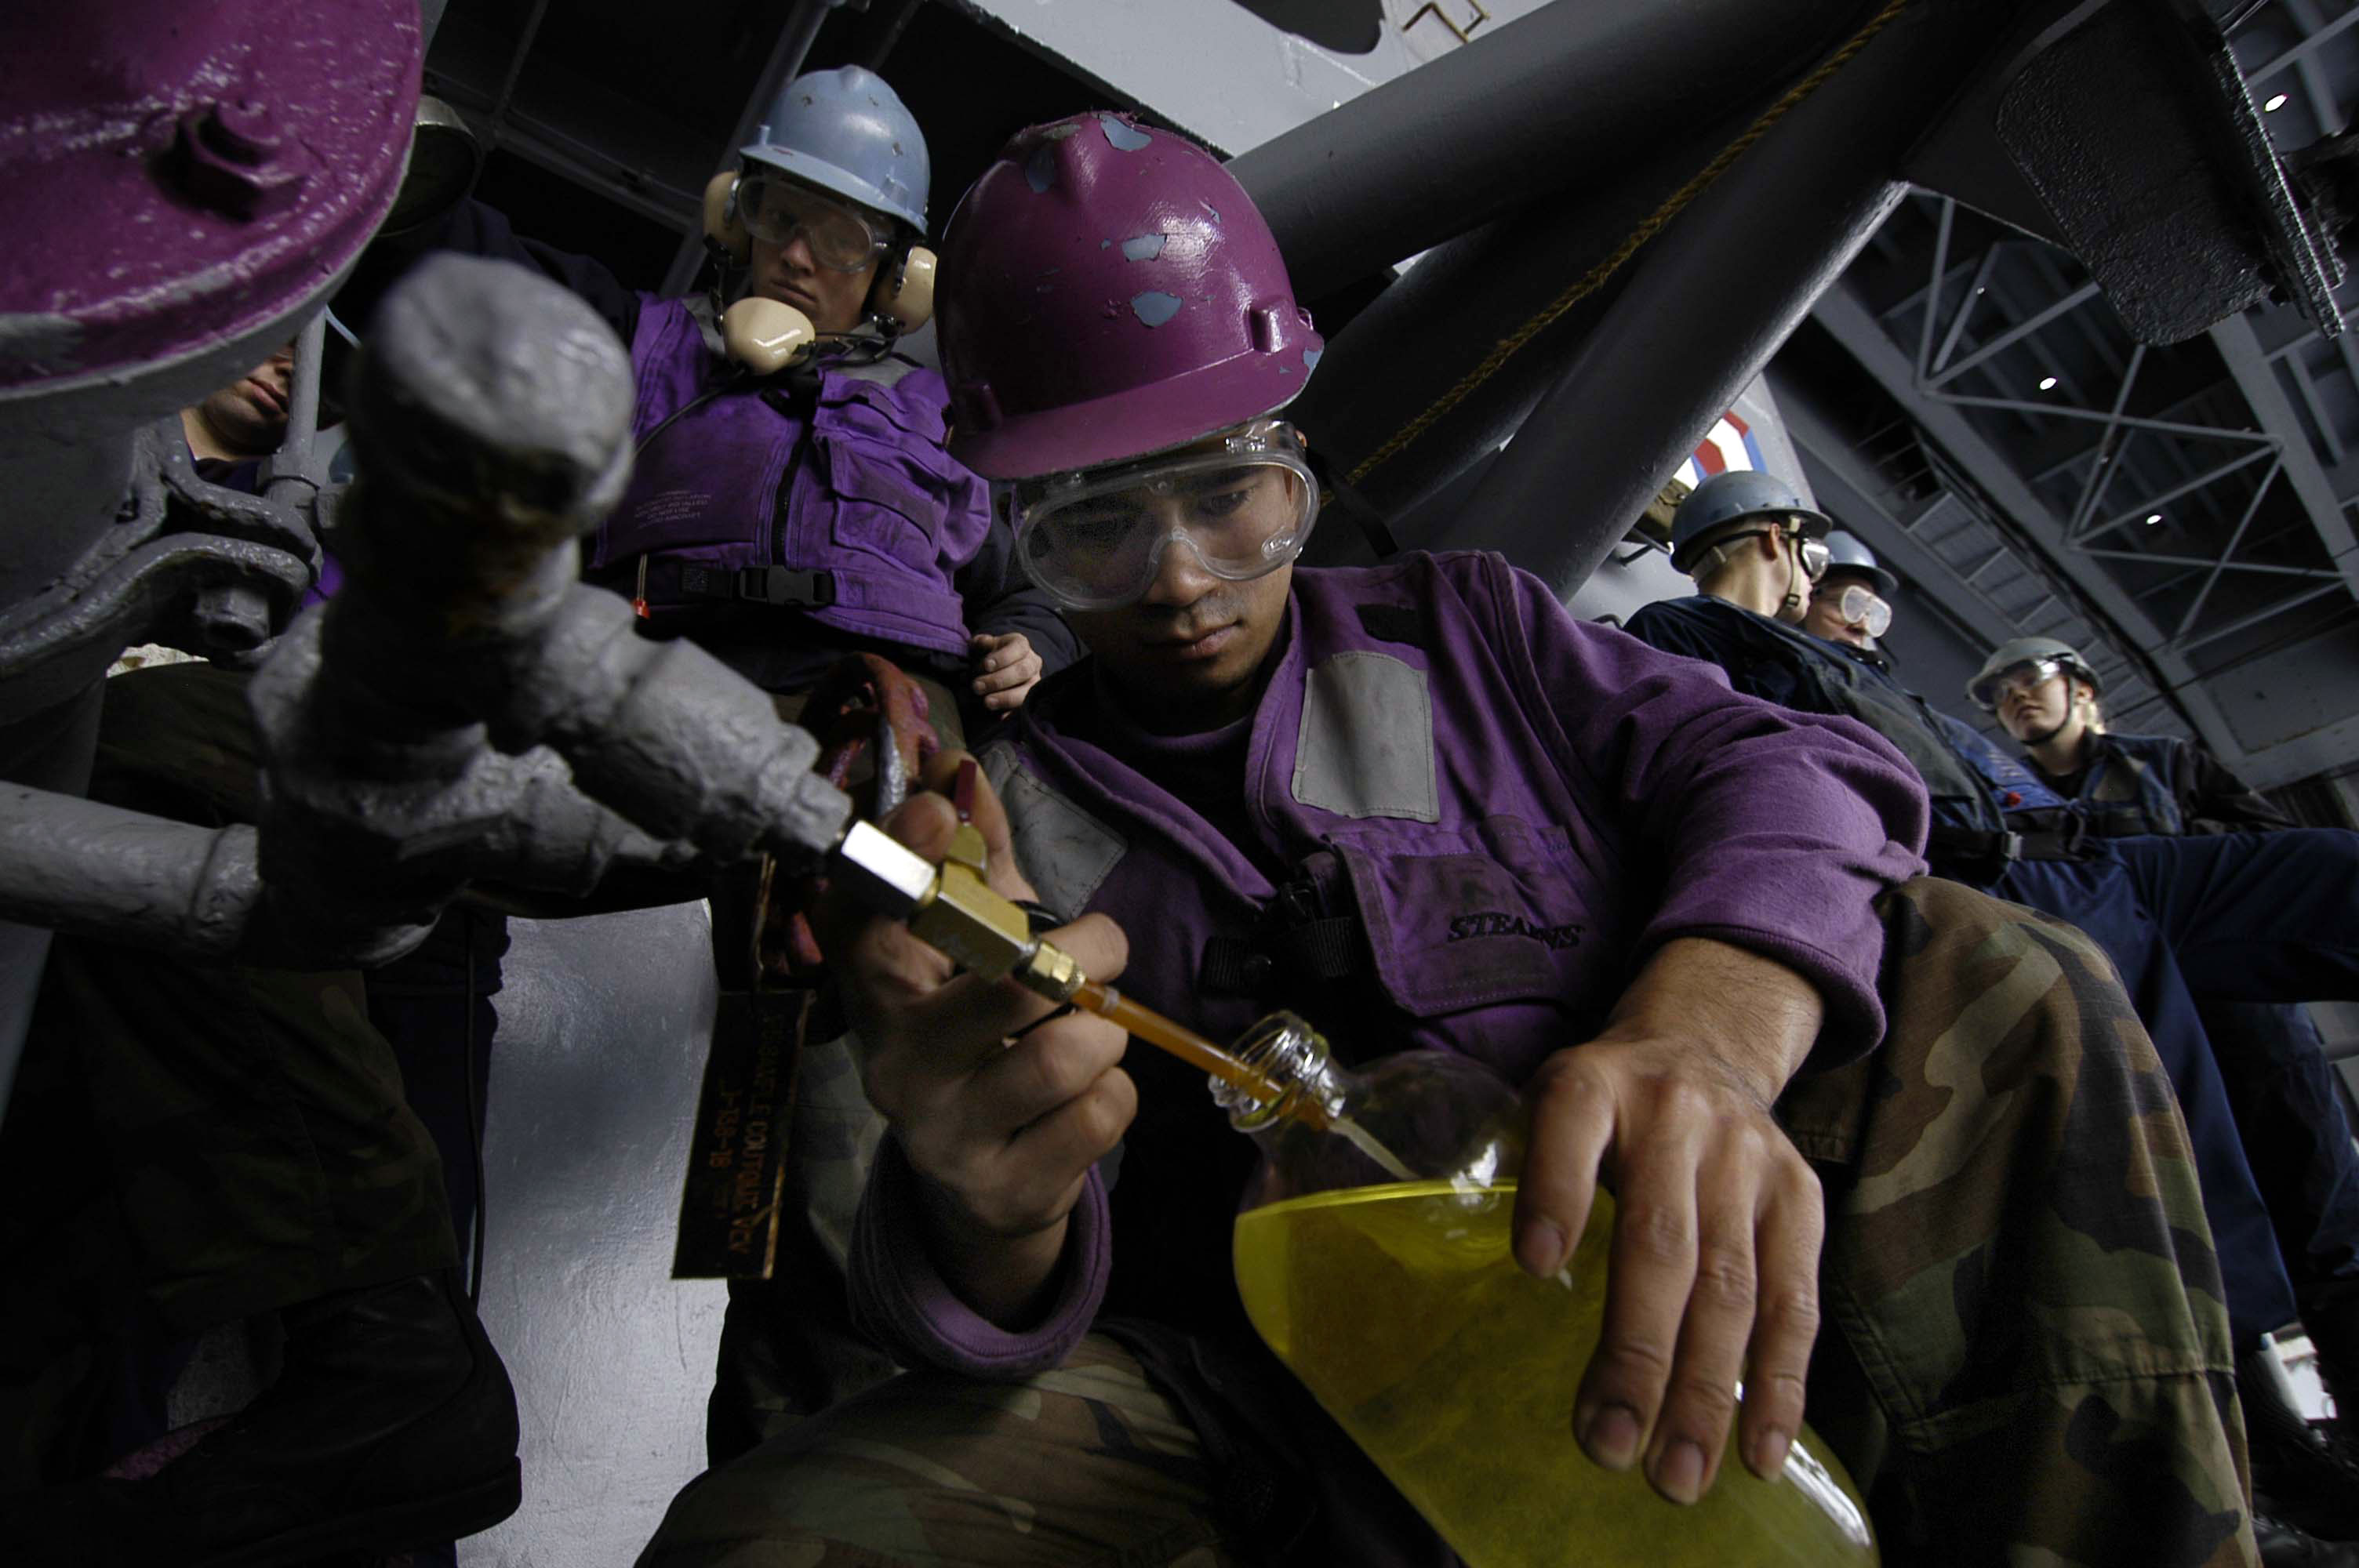 US Navy 051116-N-3946H-063 Aviation Boatswain's Mate 3rd Class Michael Patacsil of Oxnard, Calif., collects fuel samples during a replenishment at sea